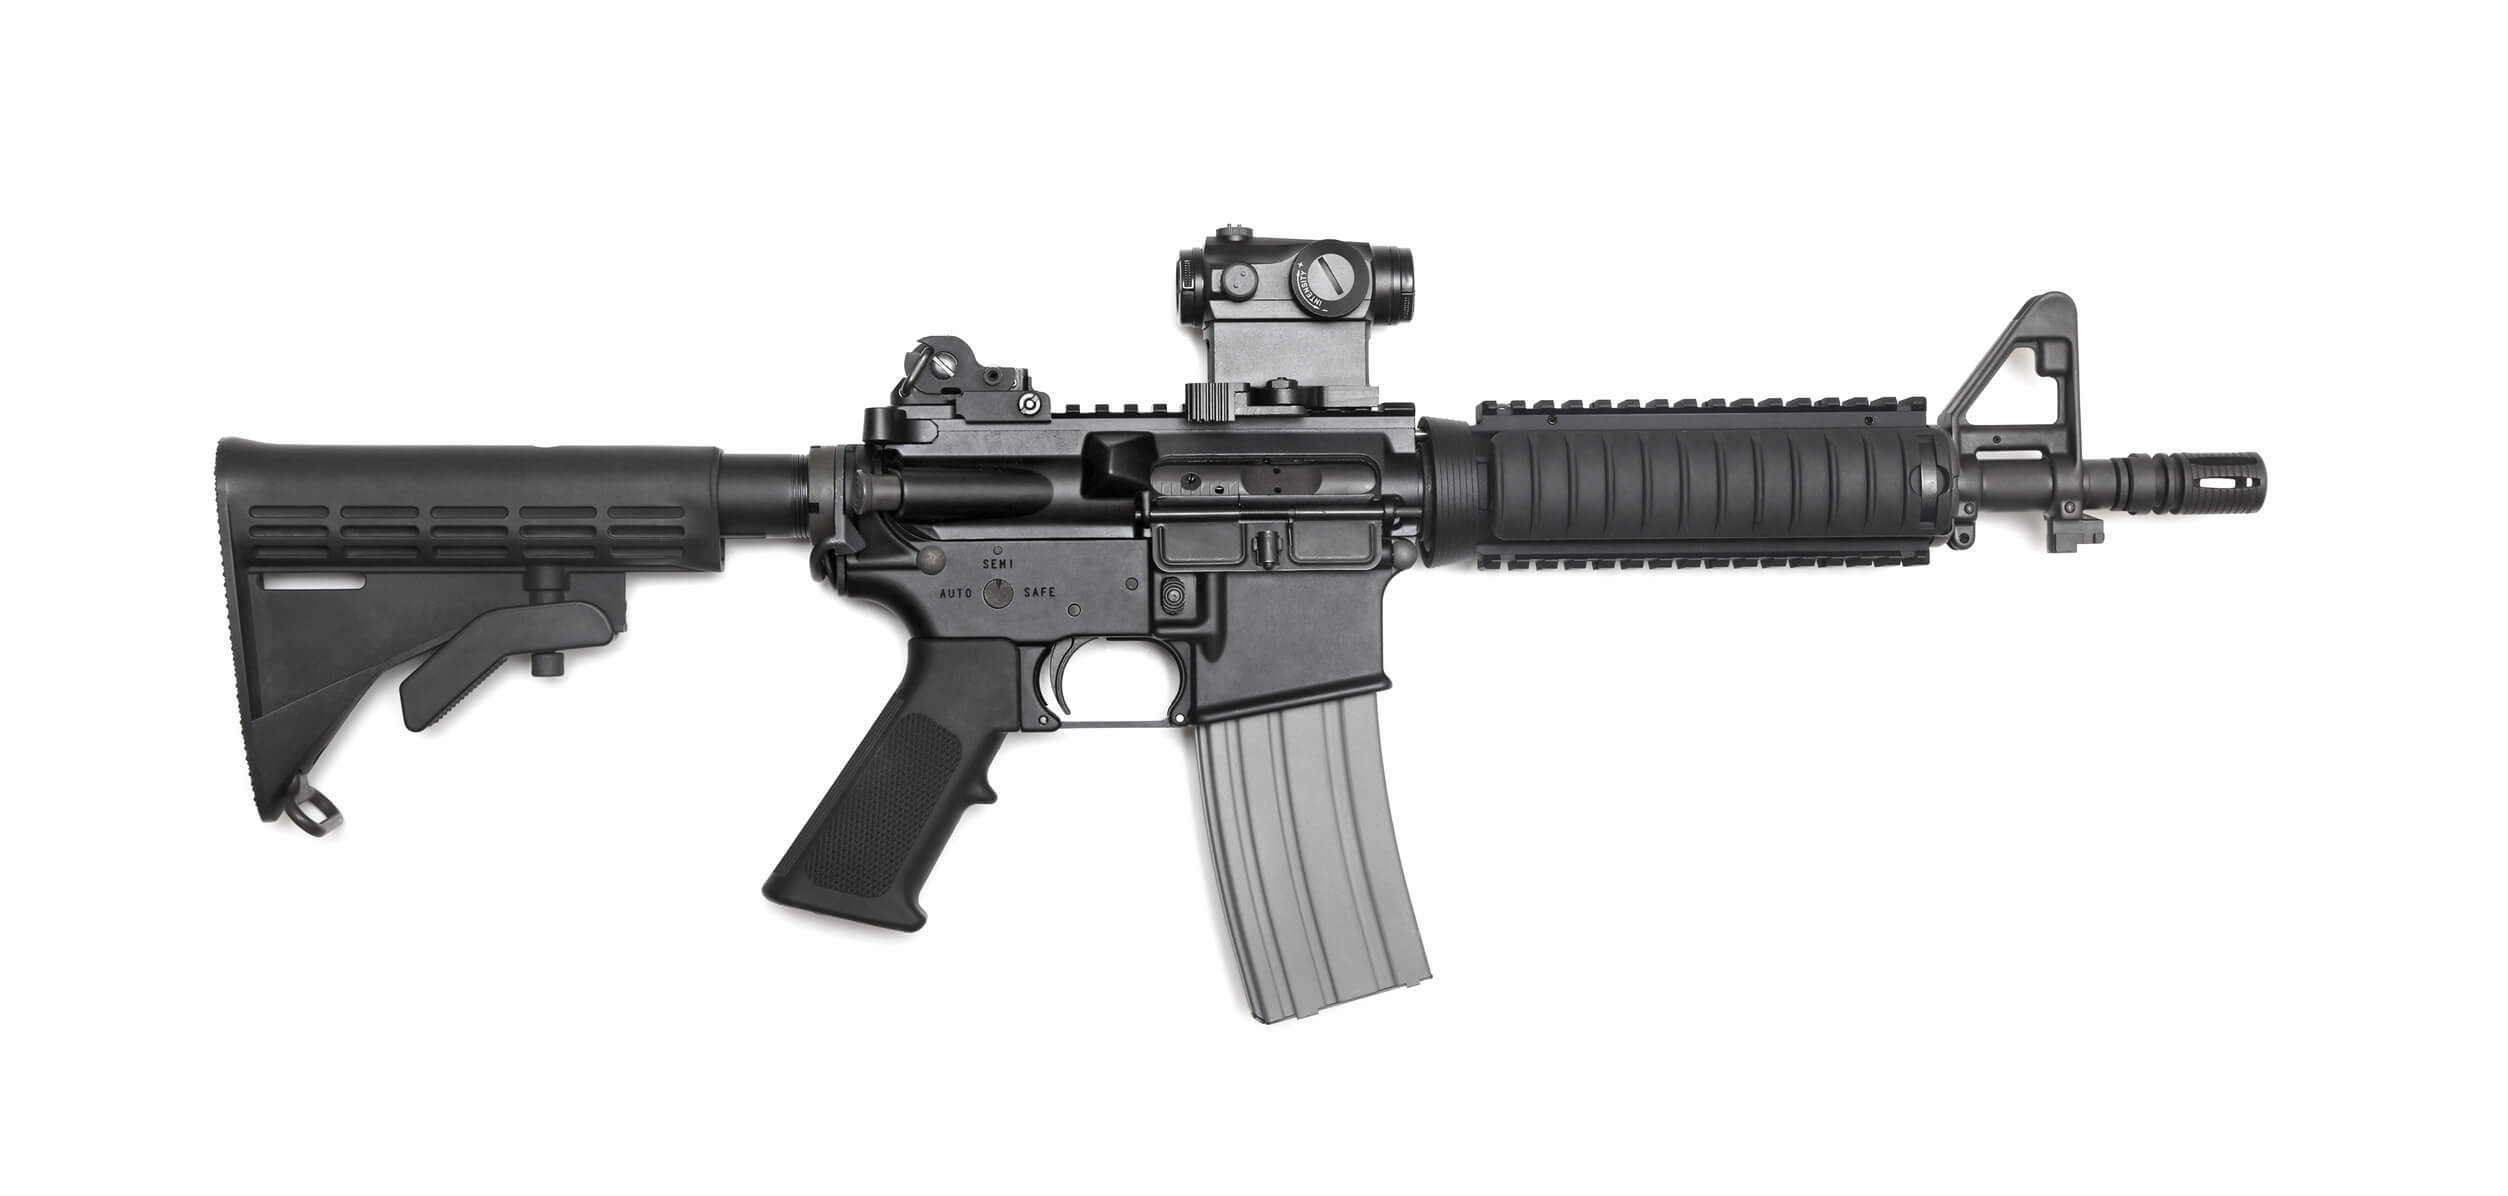 A tactical assault rifle which a reporter tried to purchase for a story.